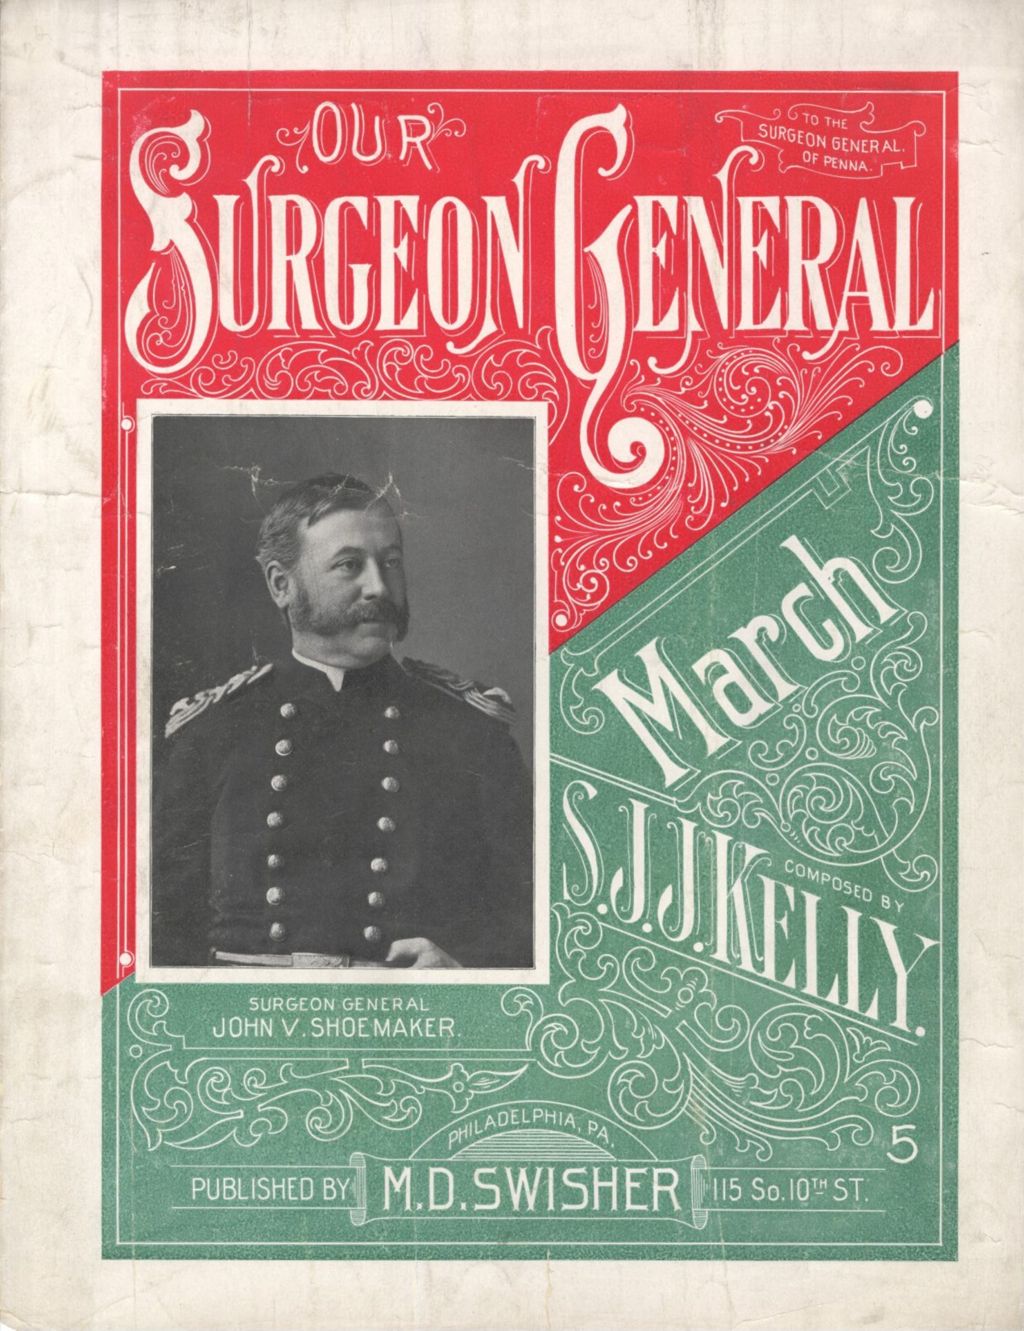 Our Surgeon General March